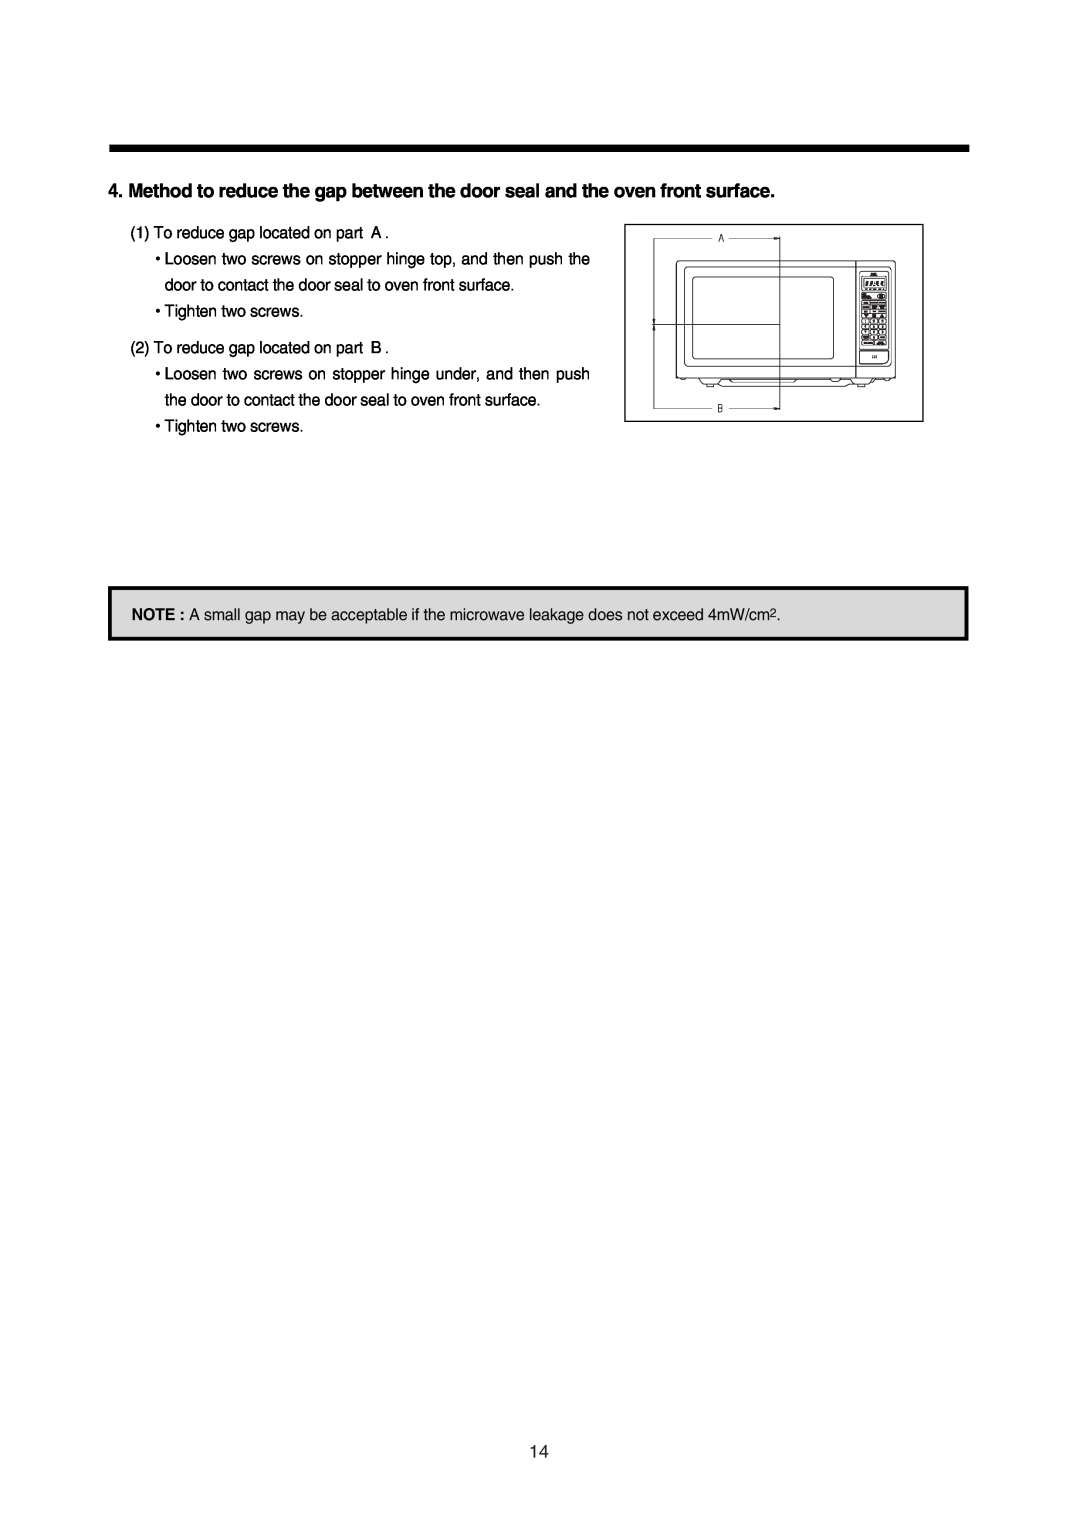 Daewoo 181GOA0A manual To reduce gap located on part A 